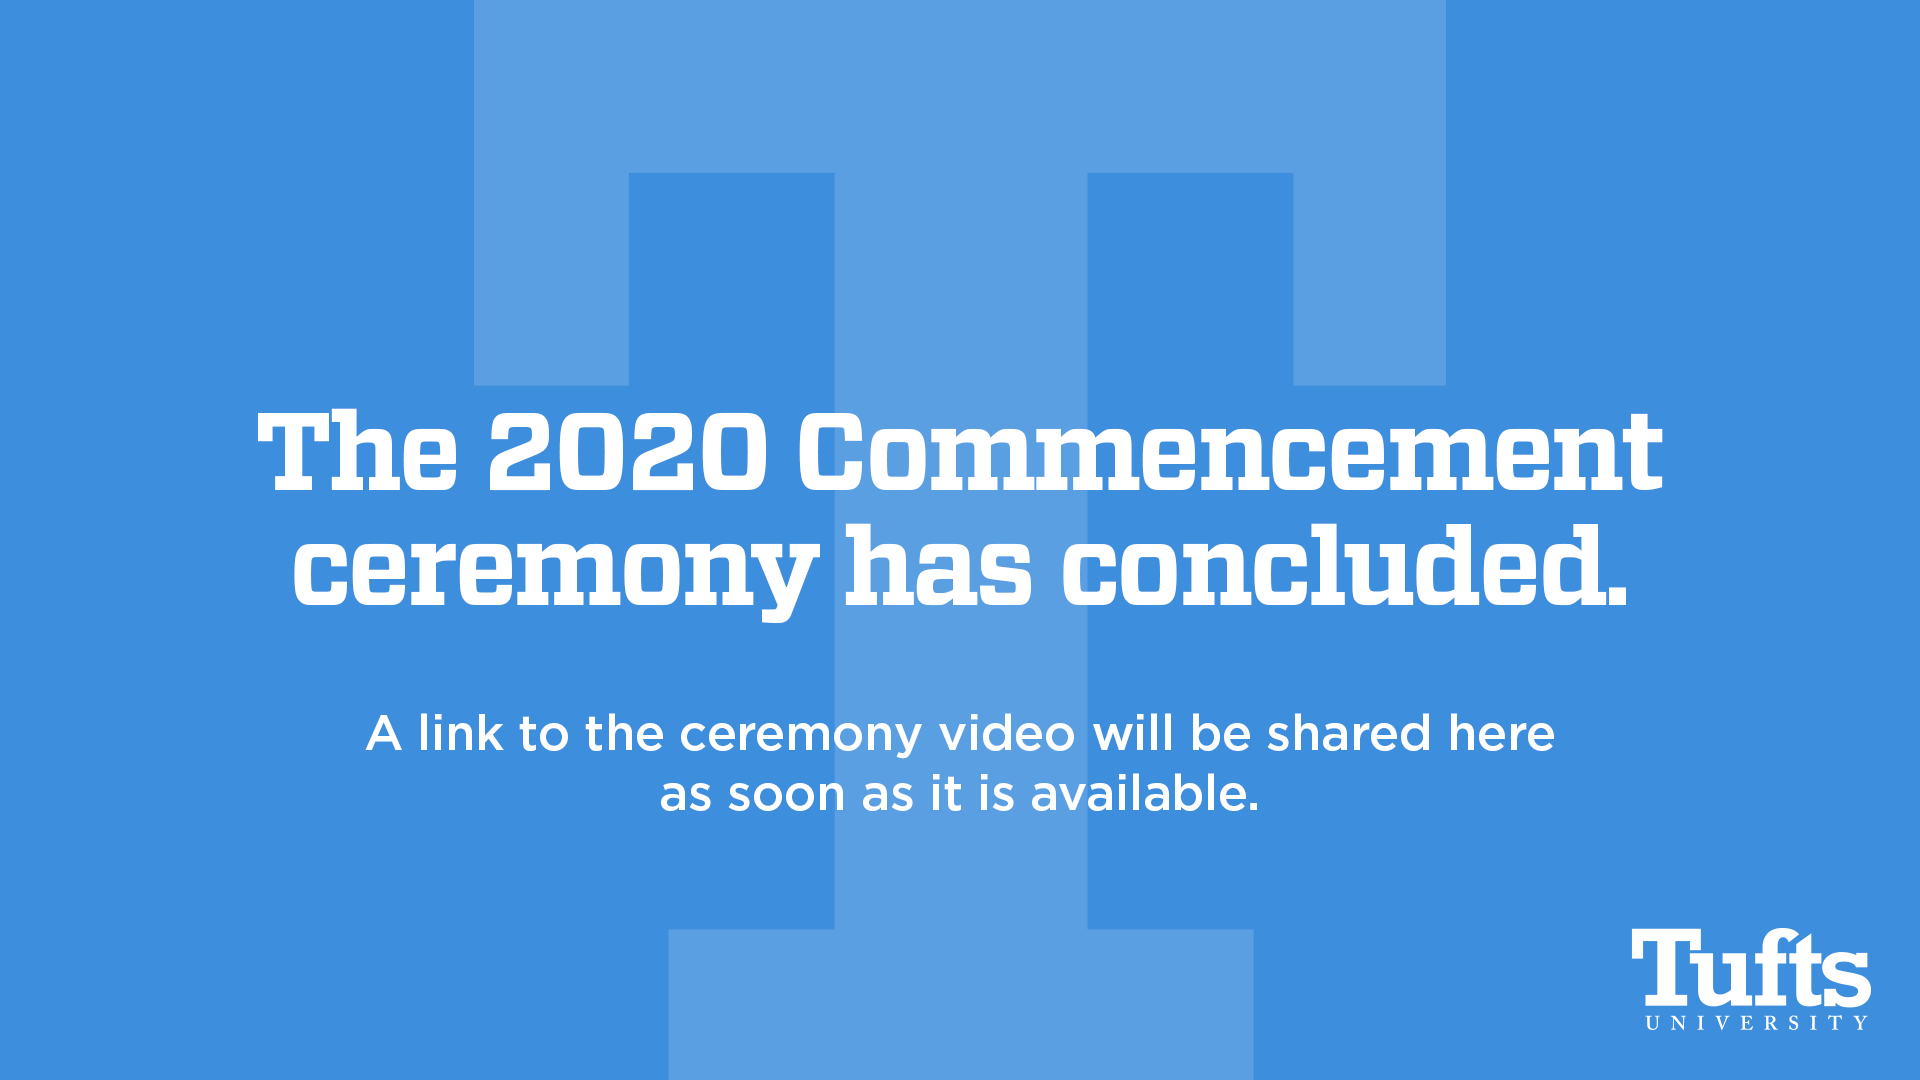  The 2020 Commencement ceremony has concluded. A link to the ceremony video will be shared here as soon as it is available.